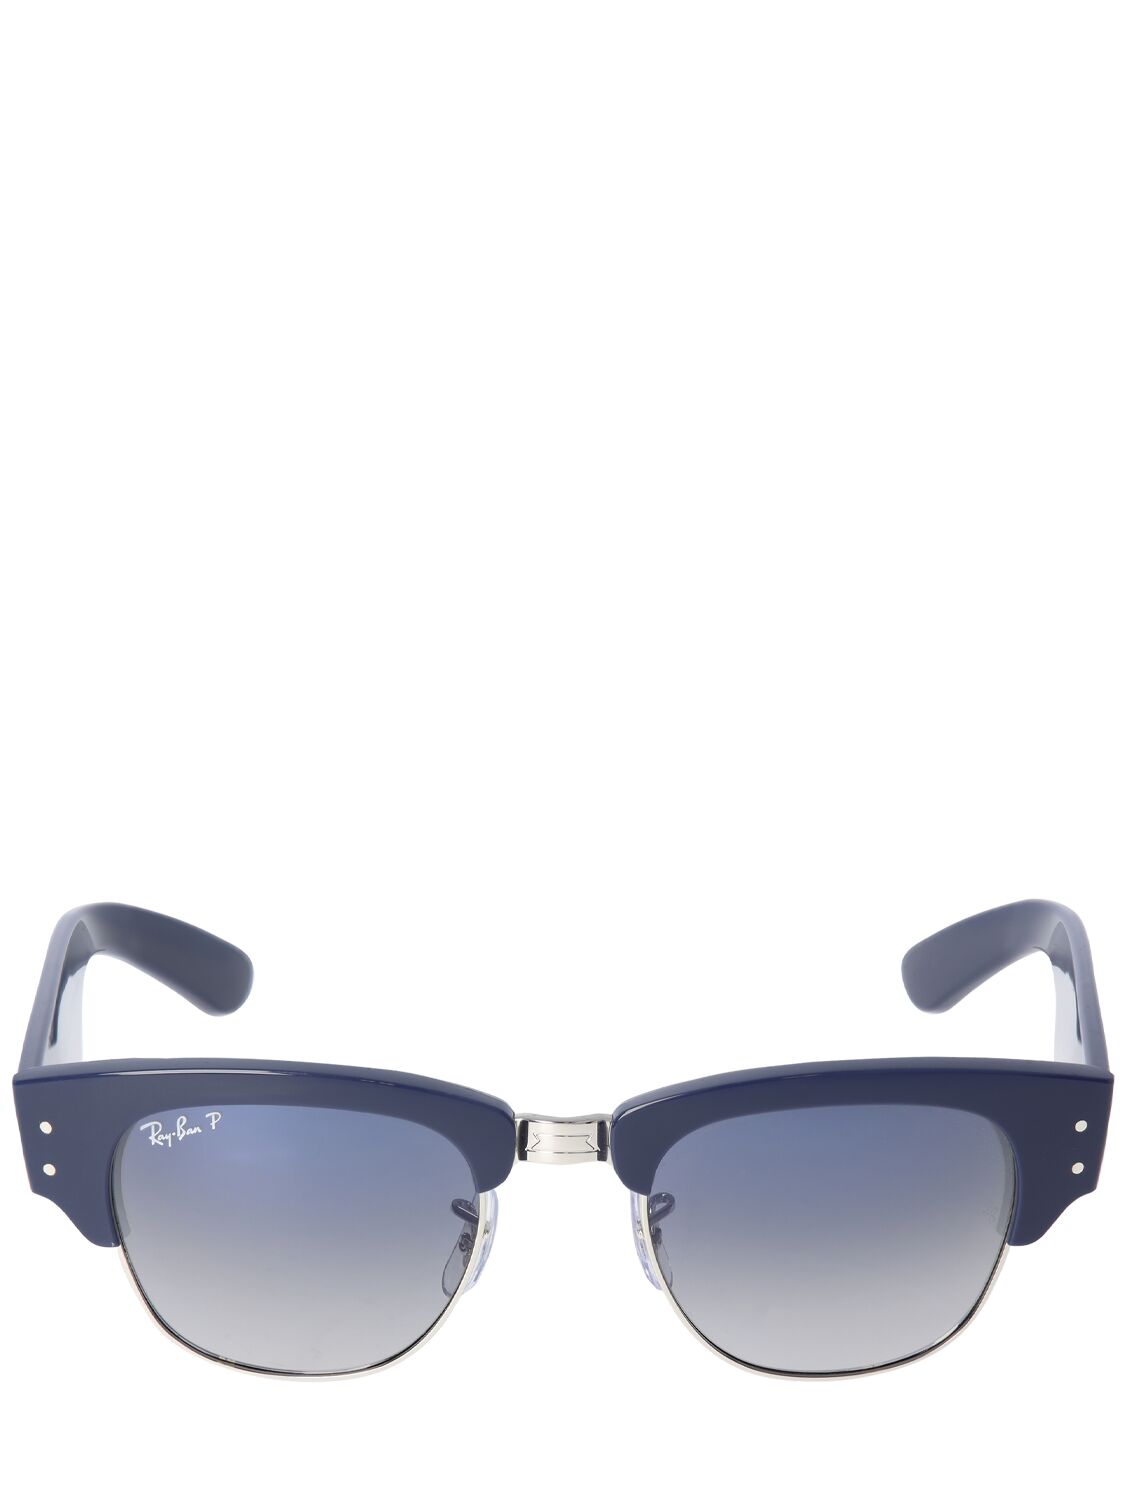 Ray Ban Mega Clubmaster Acetate Sunglasses In Blue